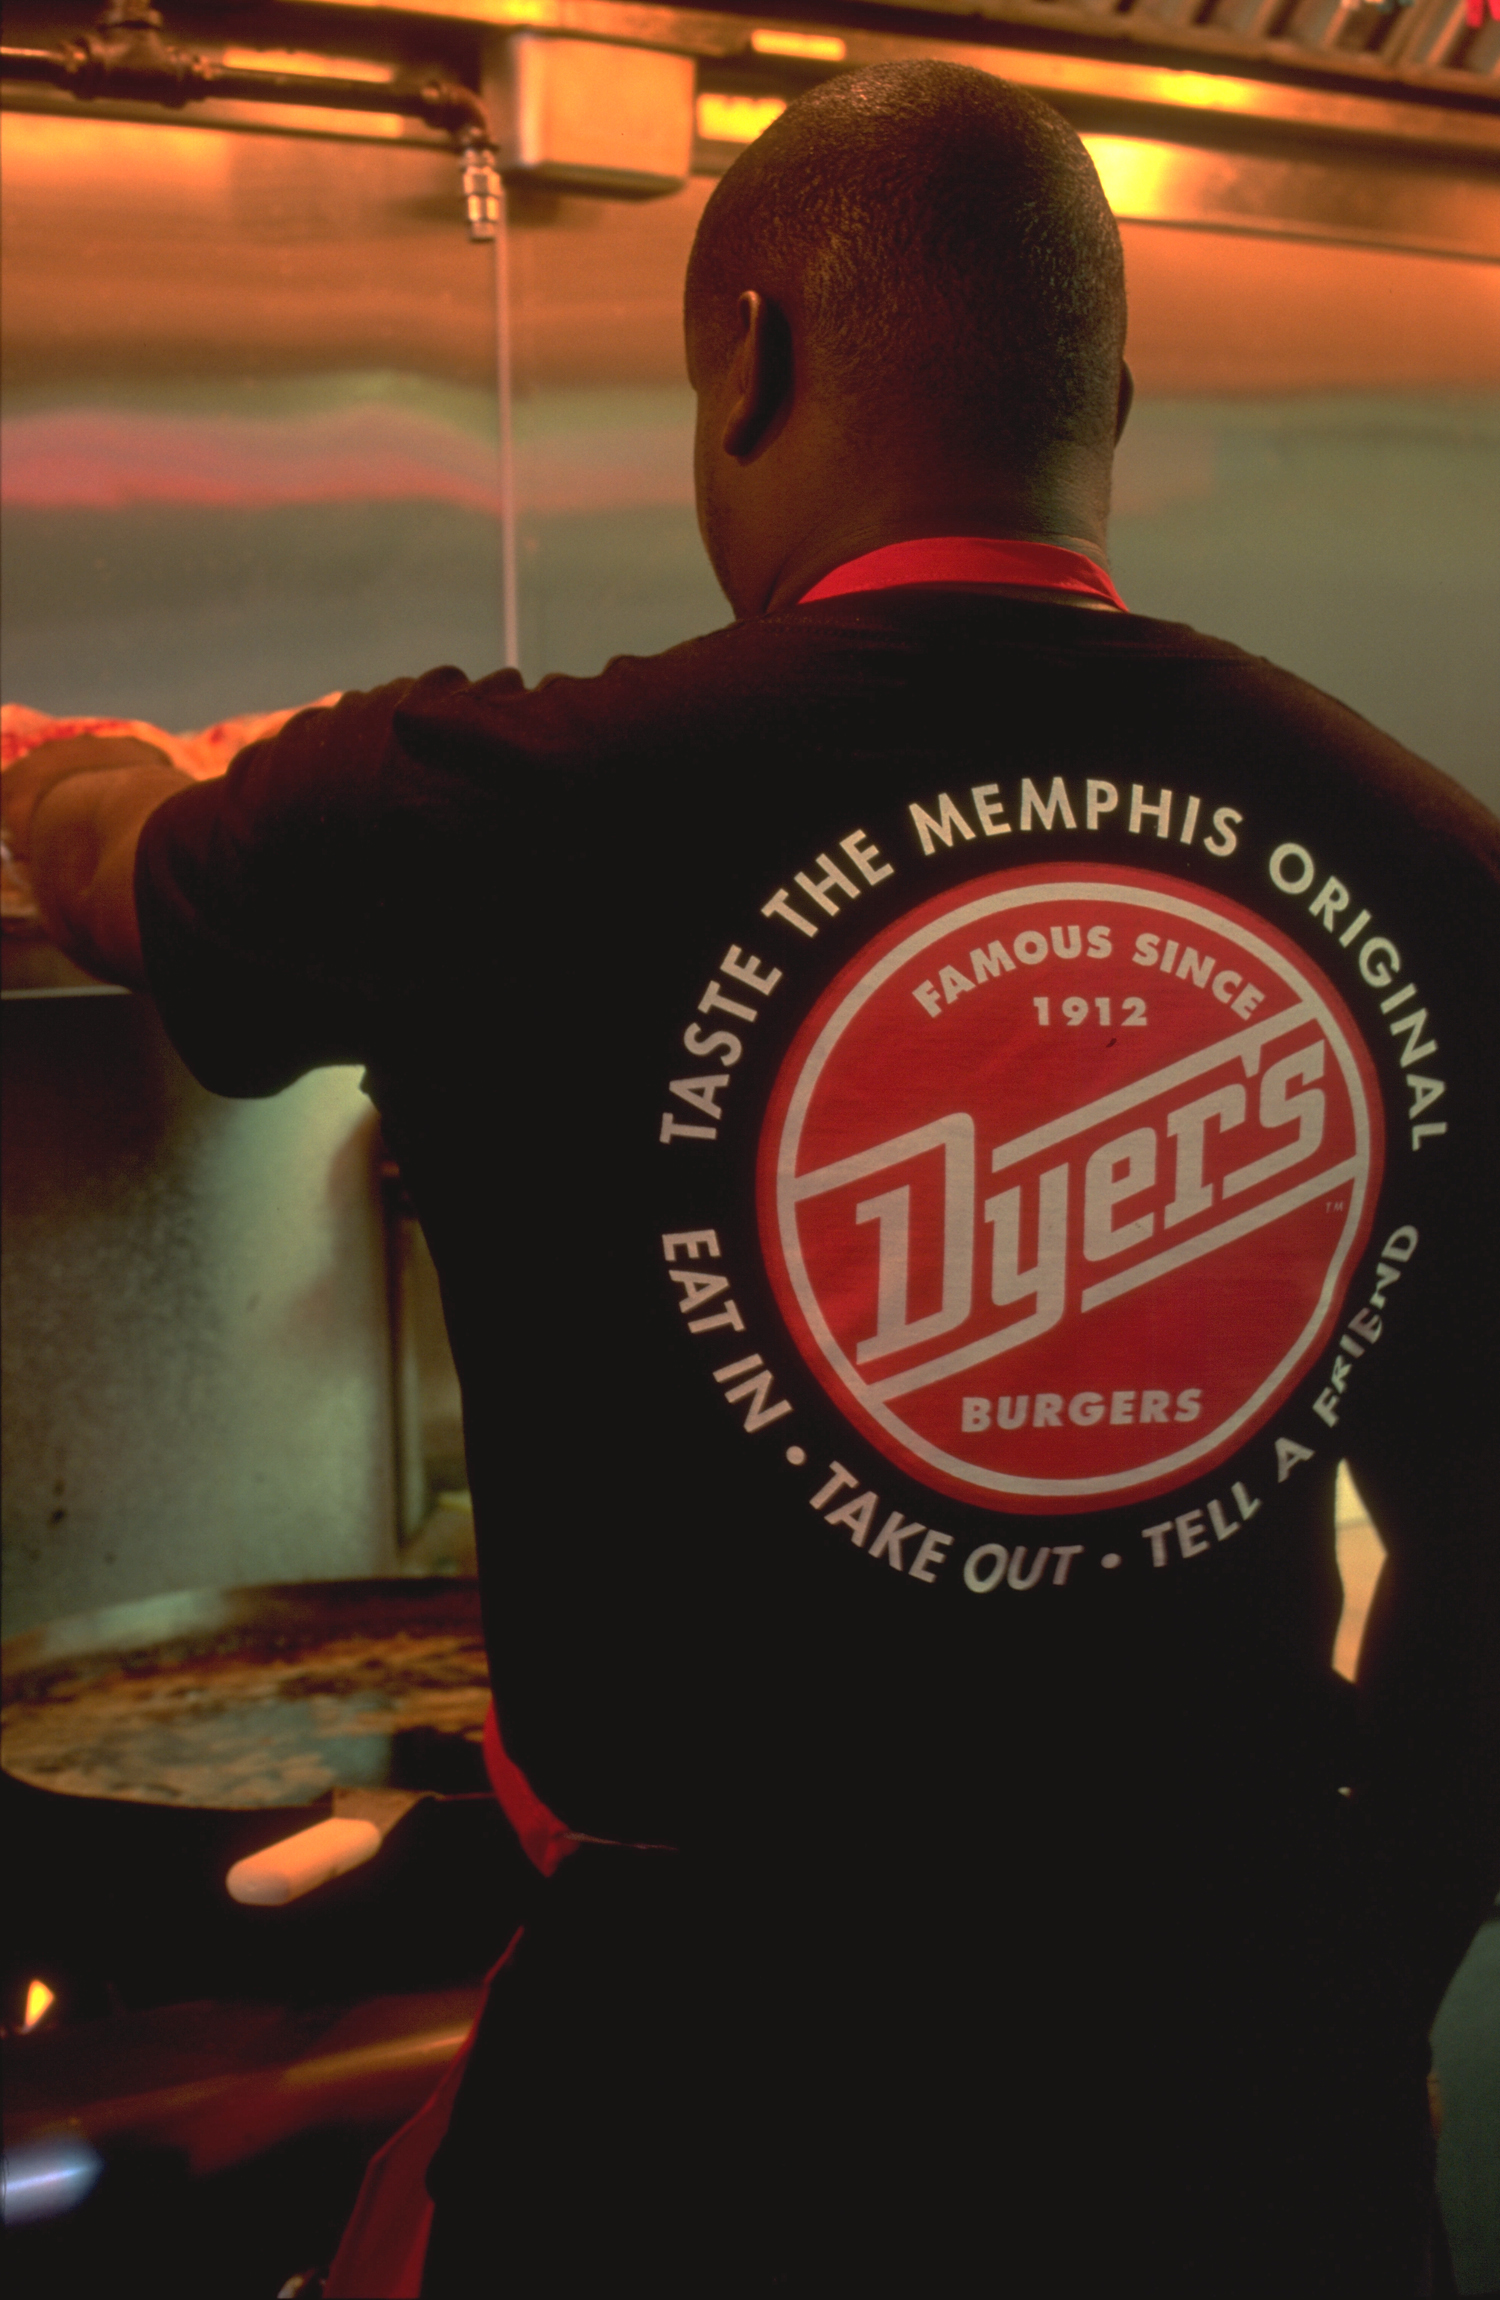  Dyer’s Burgers tee  Branding creative and design by Chuck Mitchell  Beale Street Memphis, Tennessee 